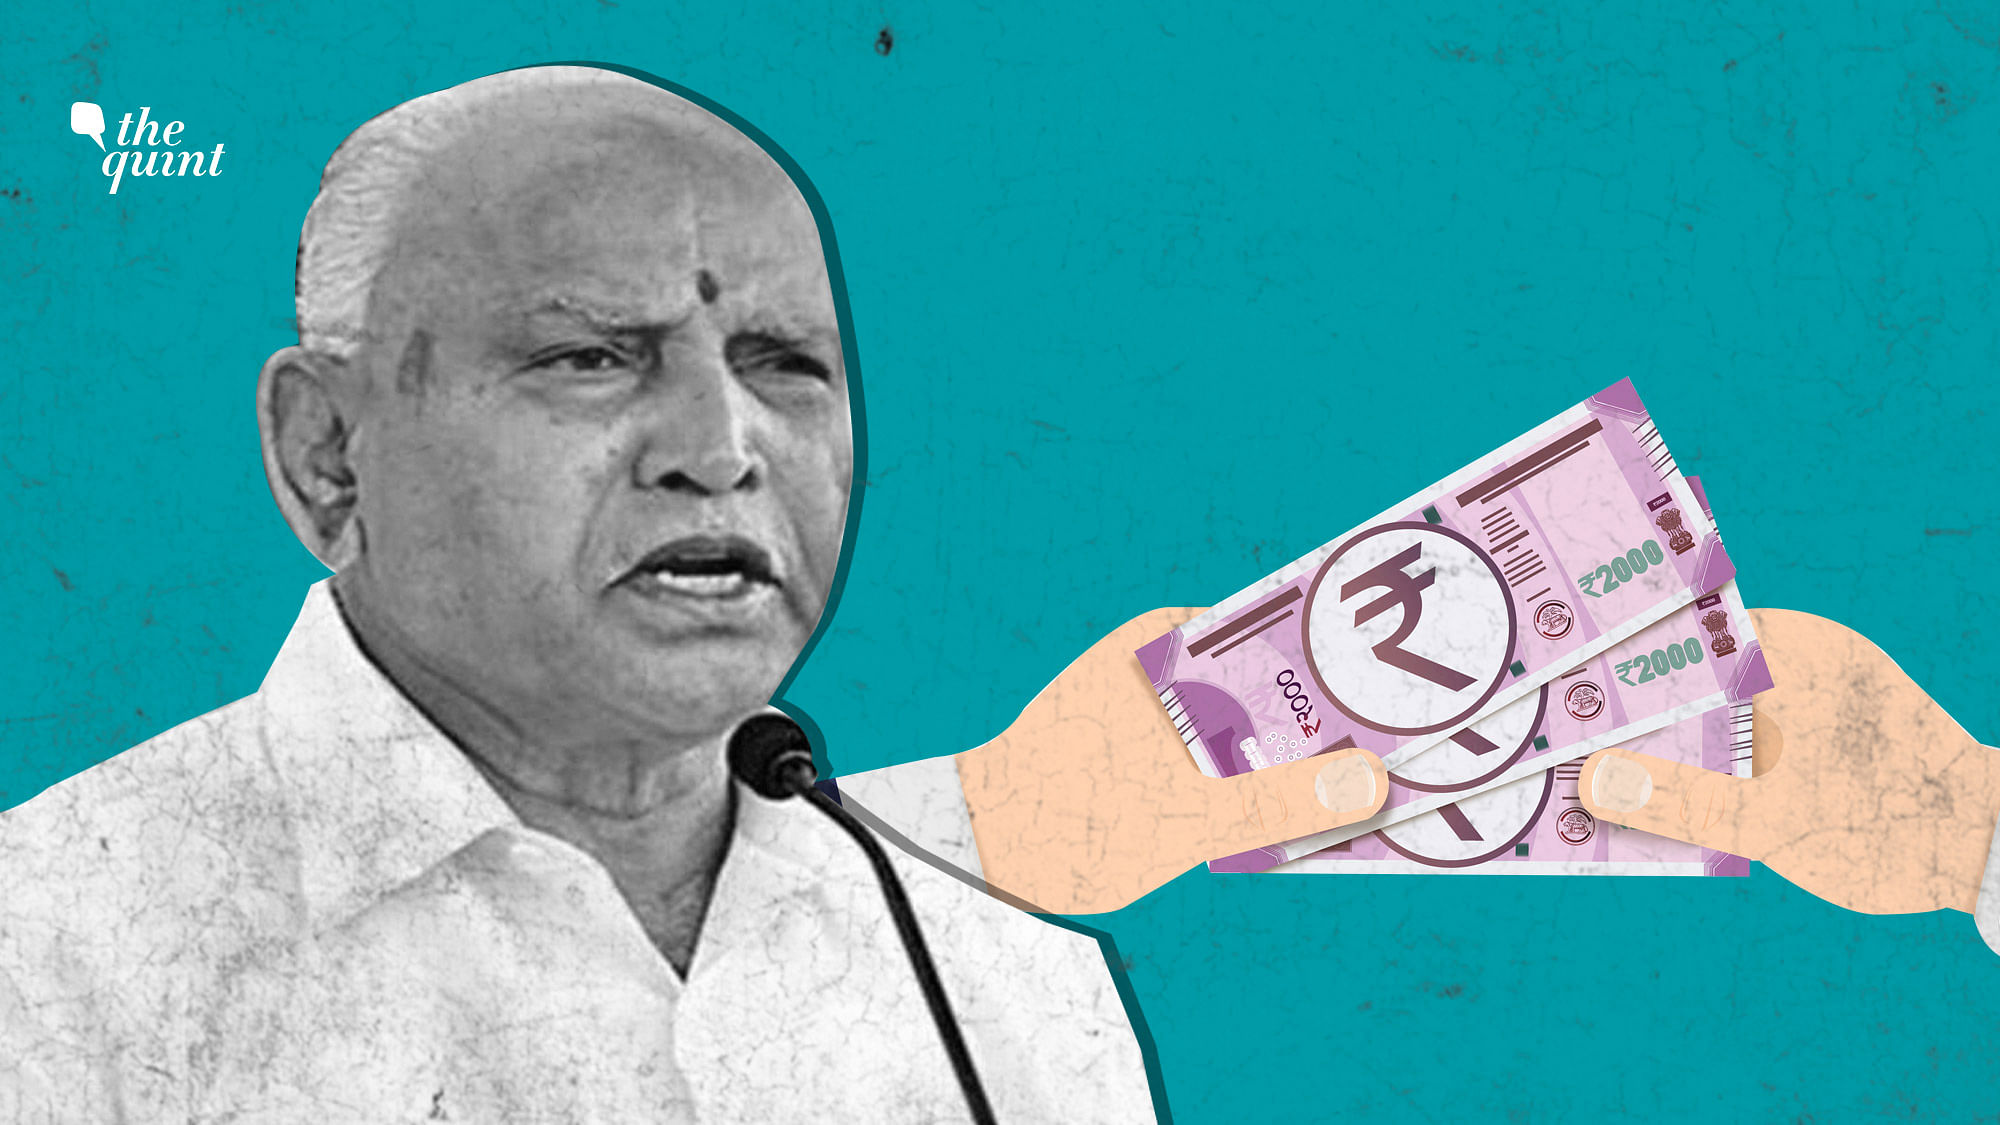 <div class="paragraphs"><p>In a relief to former <a href="https://www.thequint.com/topic/karnataka-chief-minister-bs-yediyurappa">Karnataka Chief Minister BS Yediyurappa</a>, the <a href="https://www.thequint.com/topic/supreme-court">Supreme Court</a> on Friday, 22 July, granted an interim stay on the 2020 Karnataka High Court order refusing to quash a corruption case.</p></div>